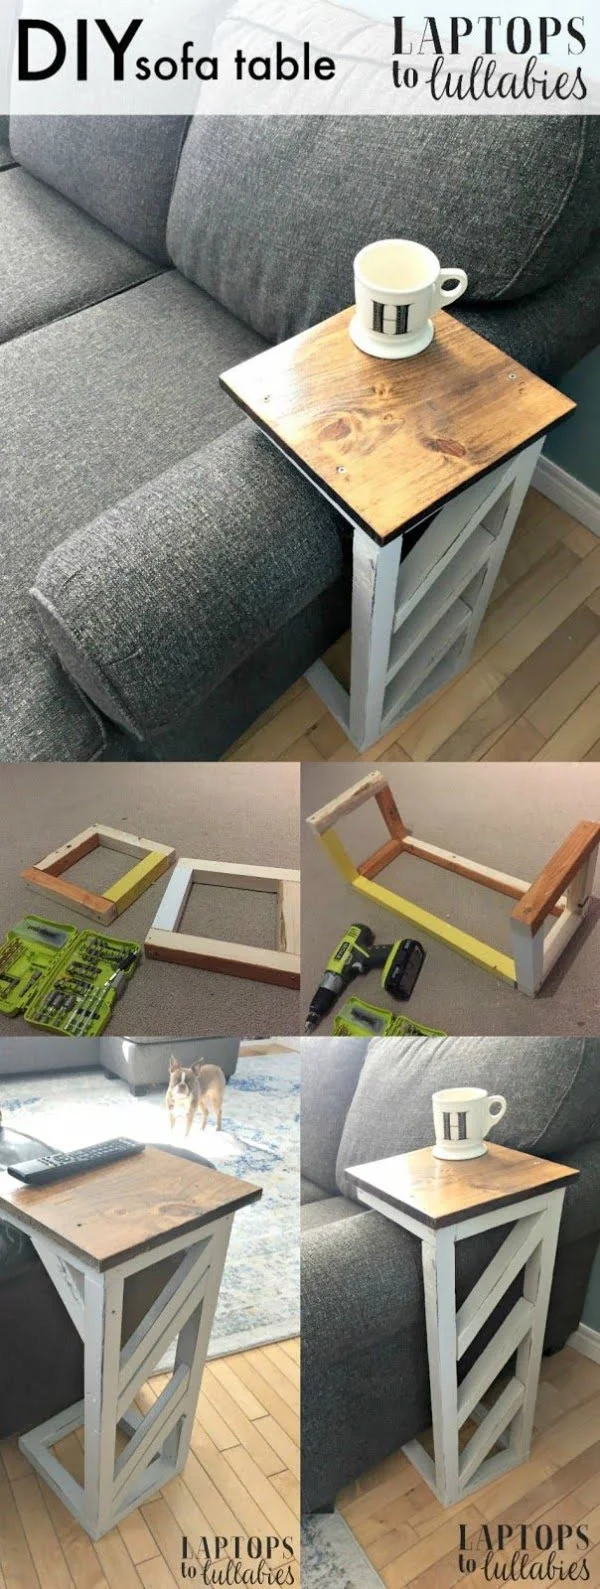 18 Easy DIY Sofa Side Tables You Can Build on a Budget - Check out the tutorial how make an easy DIY sofa side table